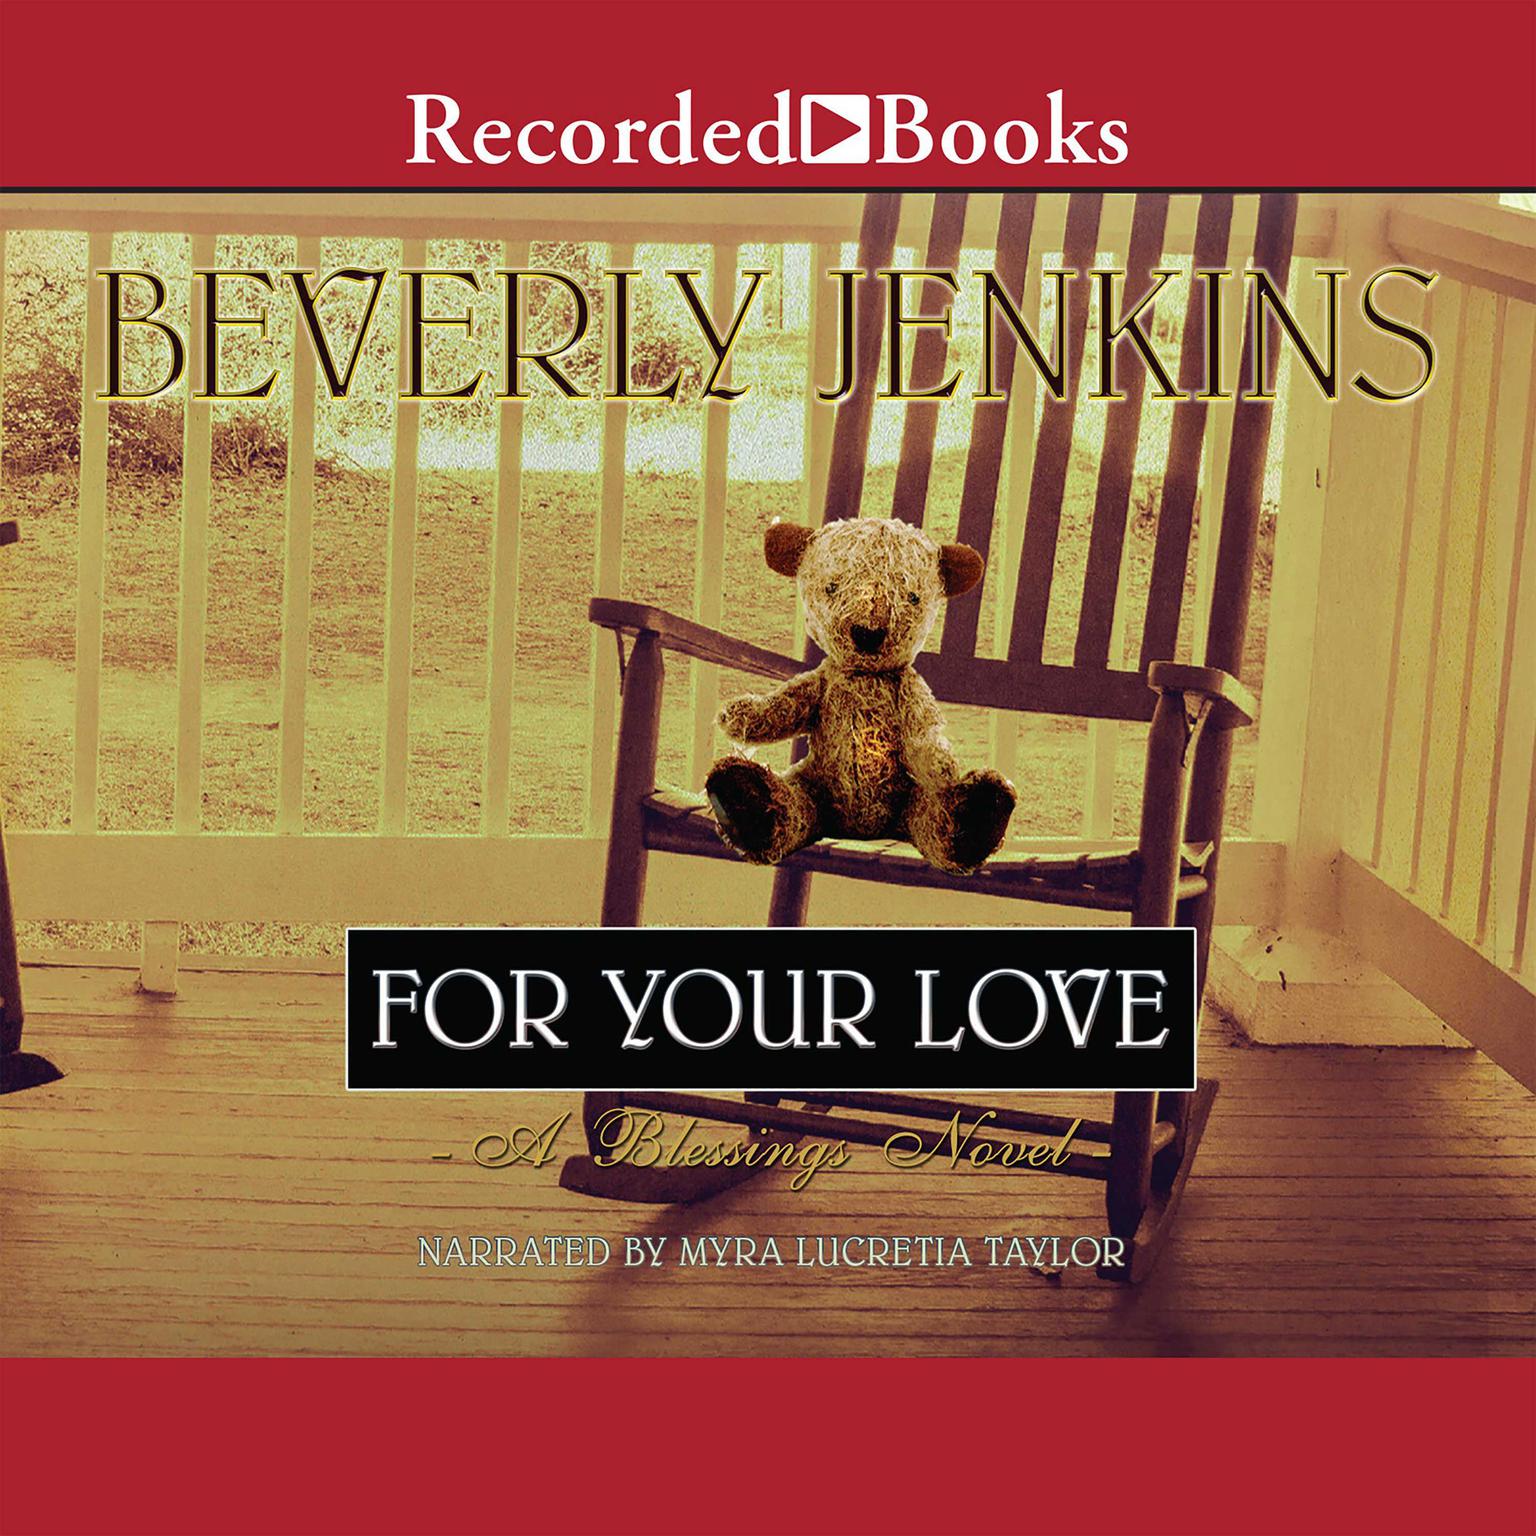 For Your Love Audiobook, by Beverly Jenkins